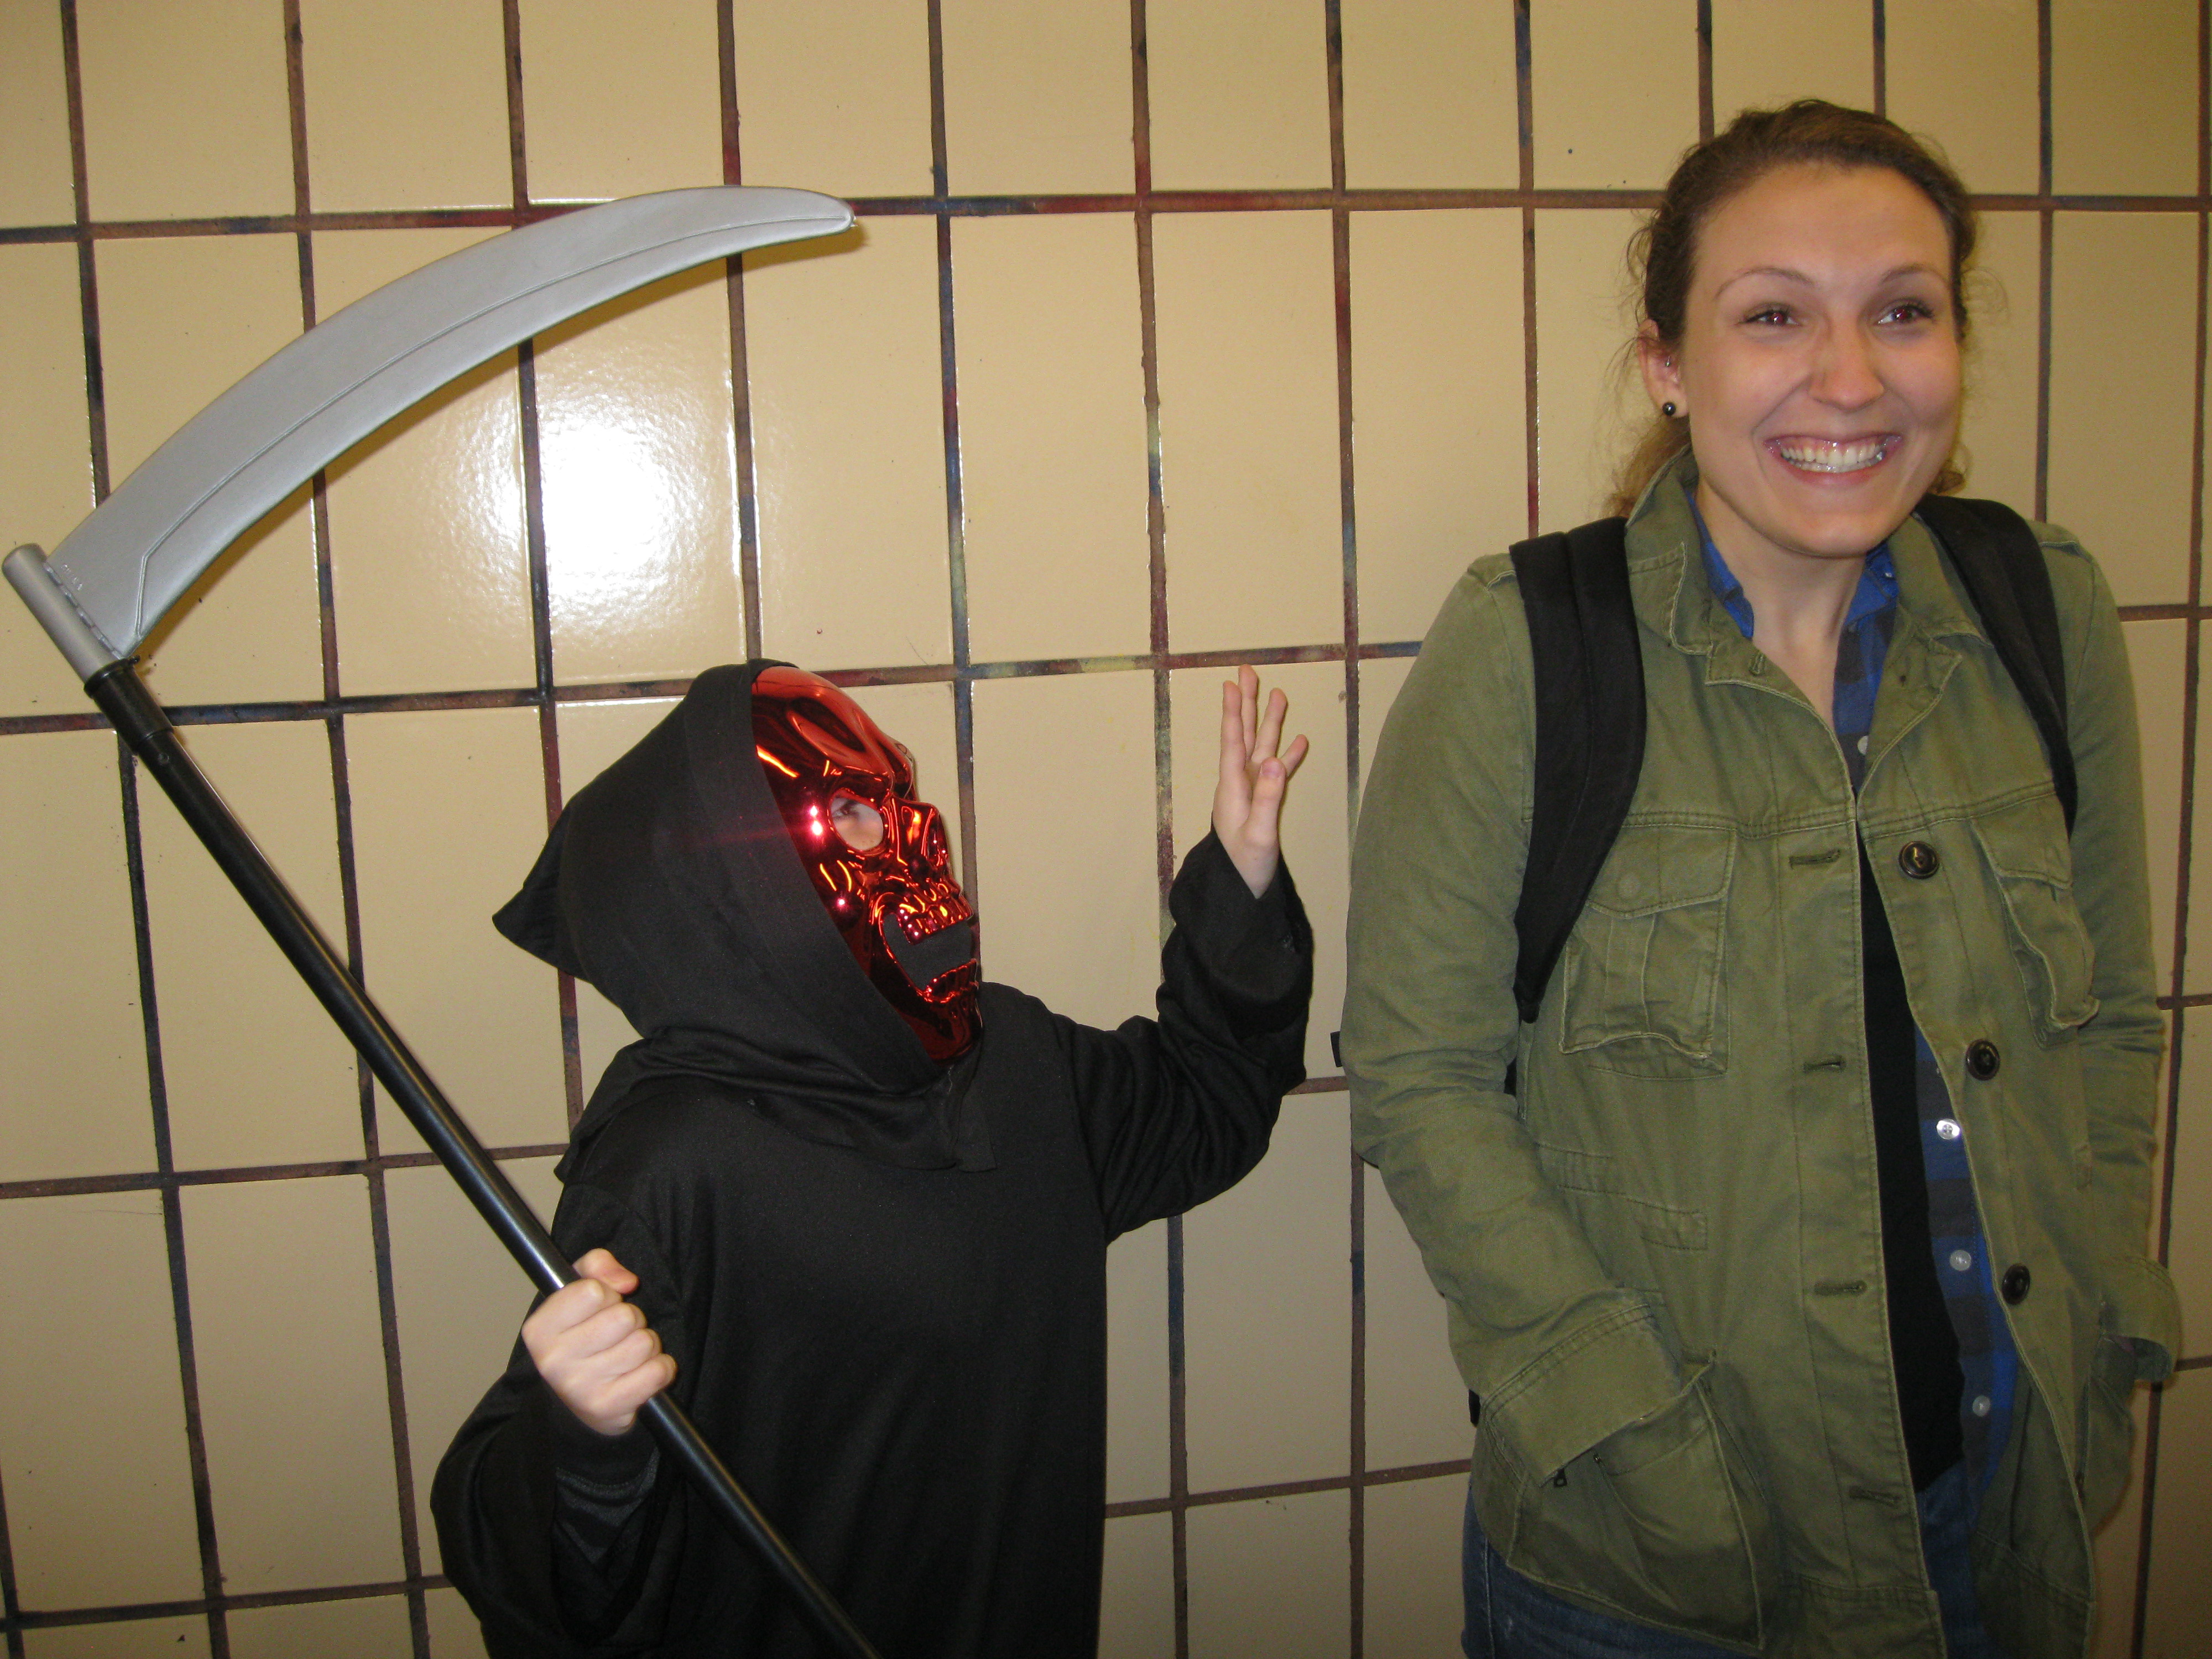 Scaring Sophie in the Subway